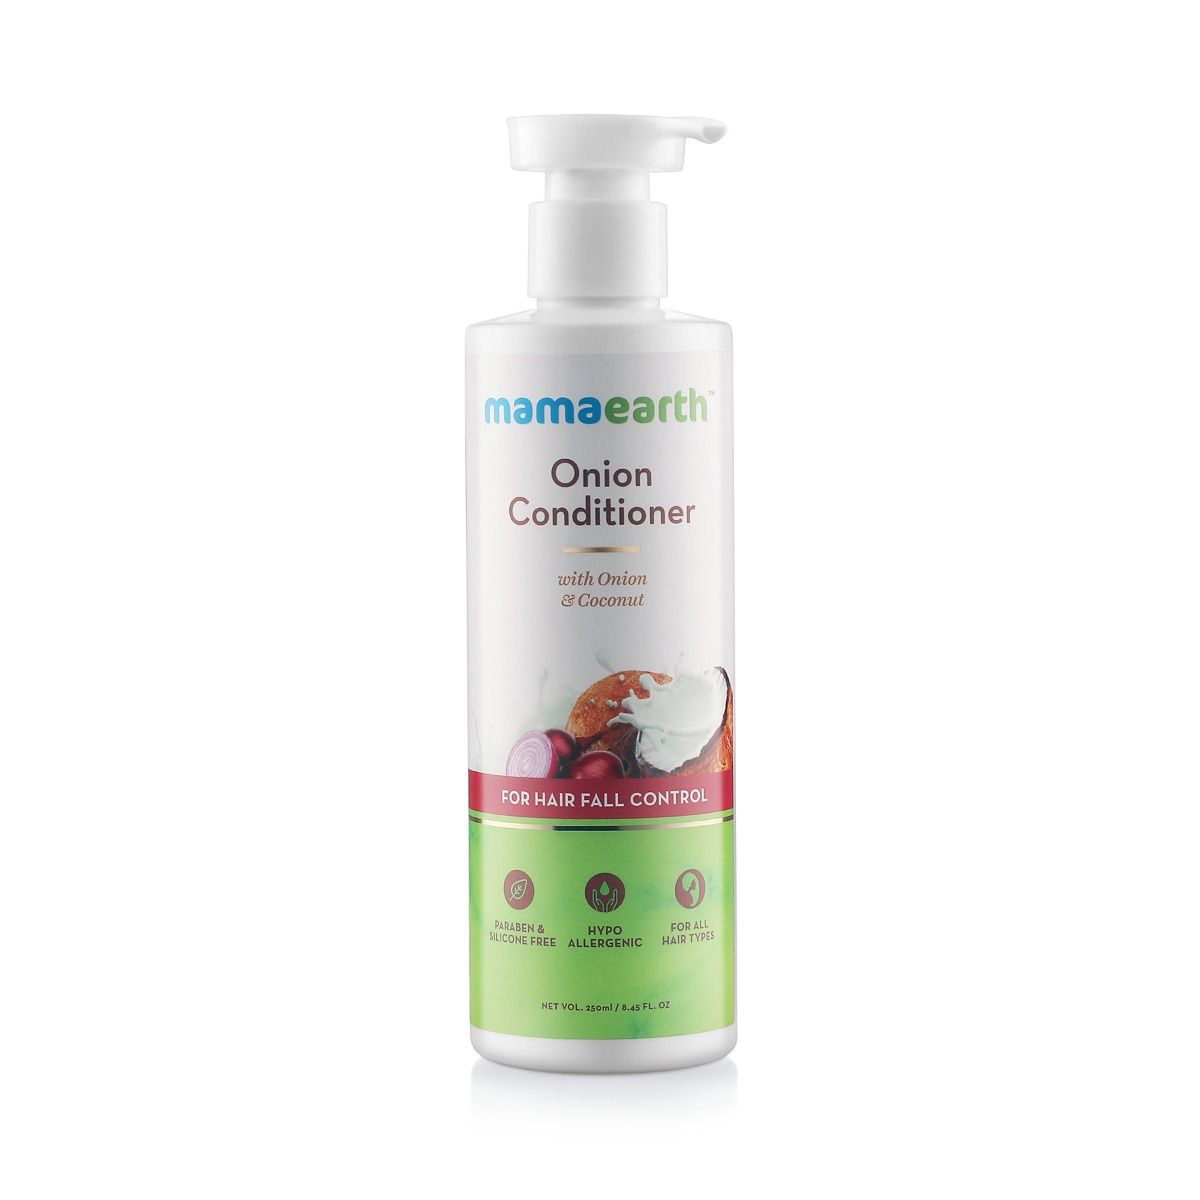 Mamaearth Onion Conditioner With Onion and Coconut, 250 ml, Pack of 1 